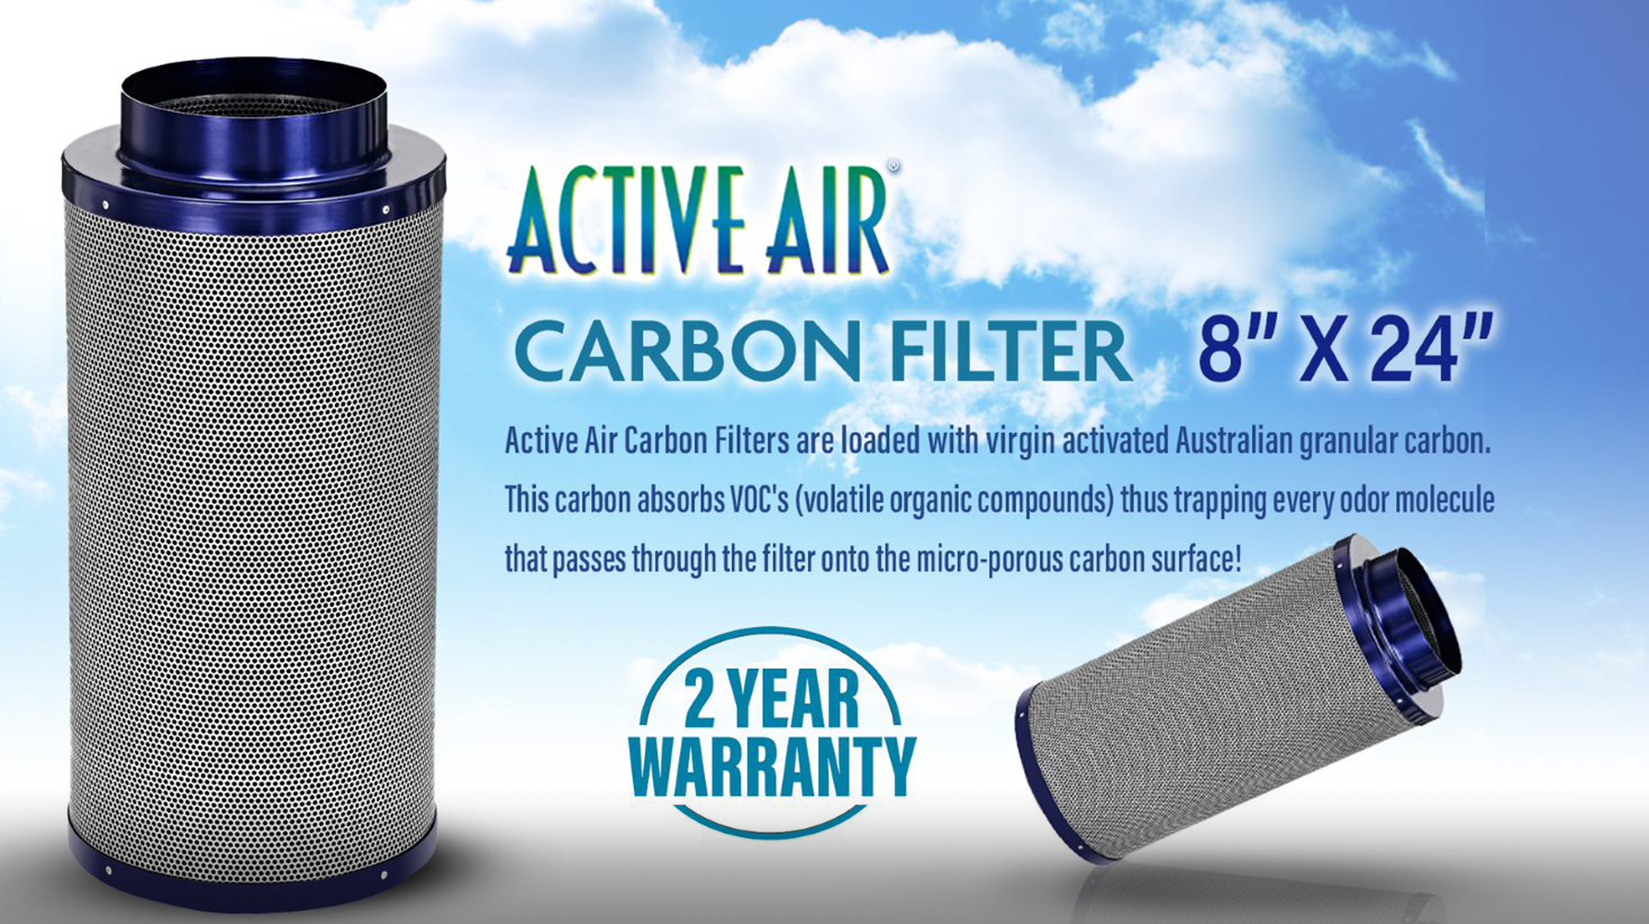 Active air carbon filter - available at Homegrown Outlet